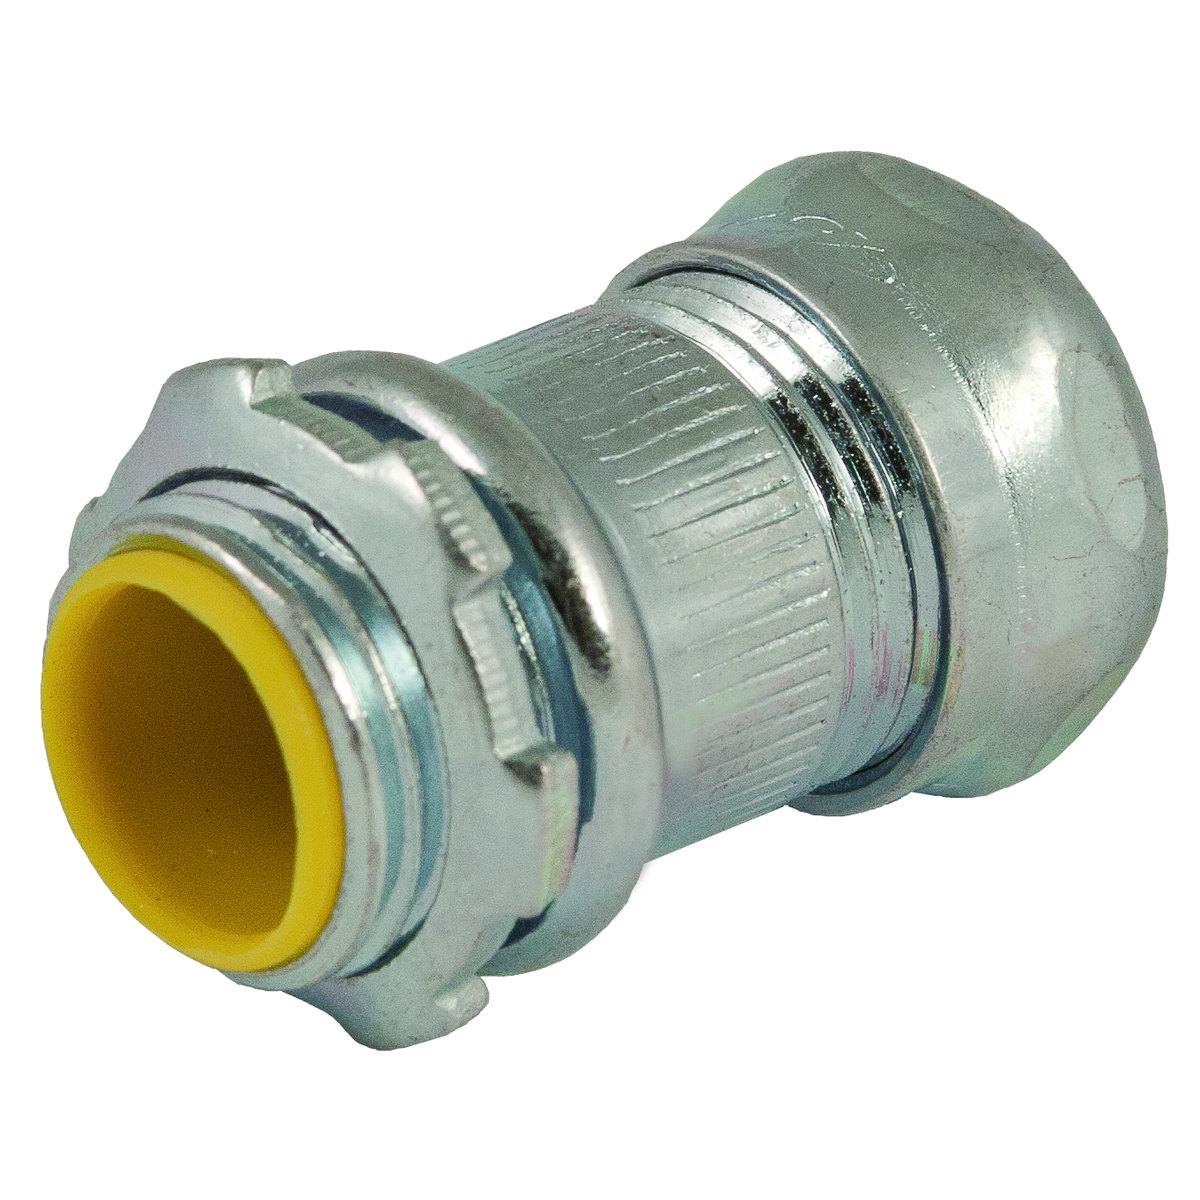 RACO 2912 1/2" STEEL INSULATED COMPRESSION EMT CONNECTOR